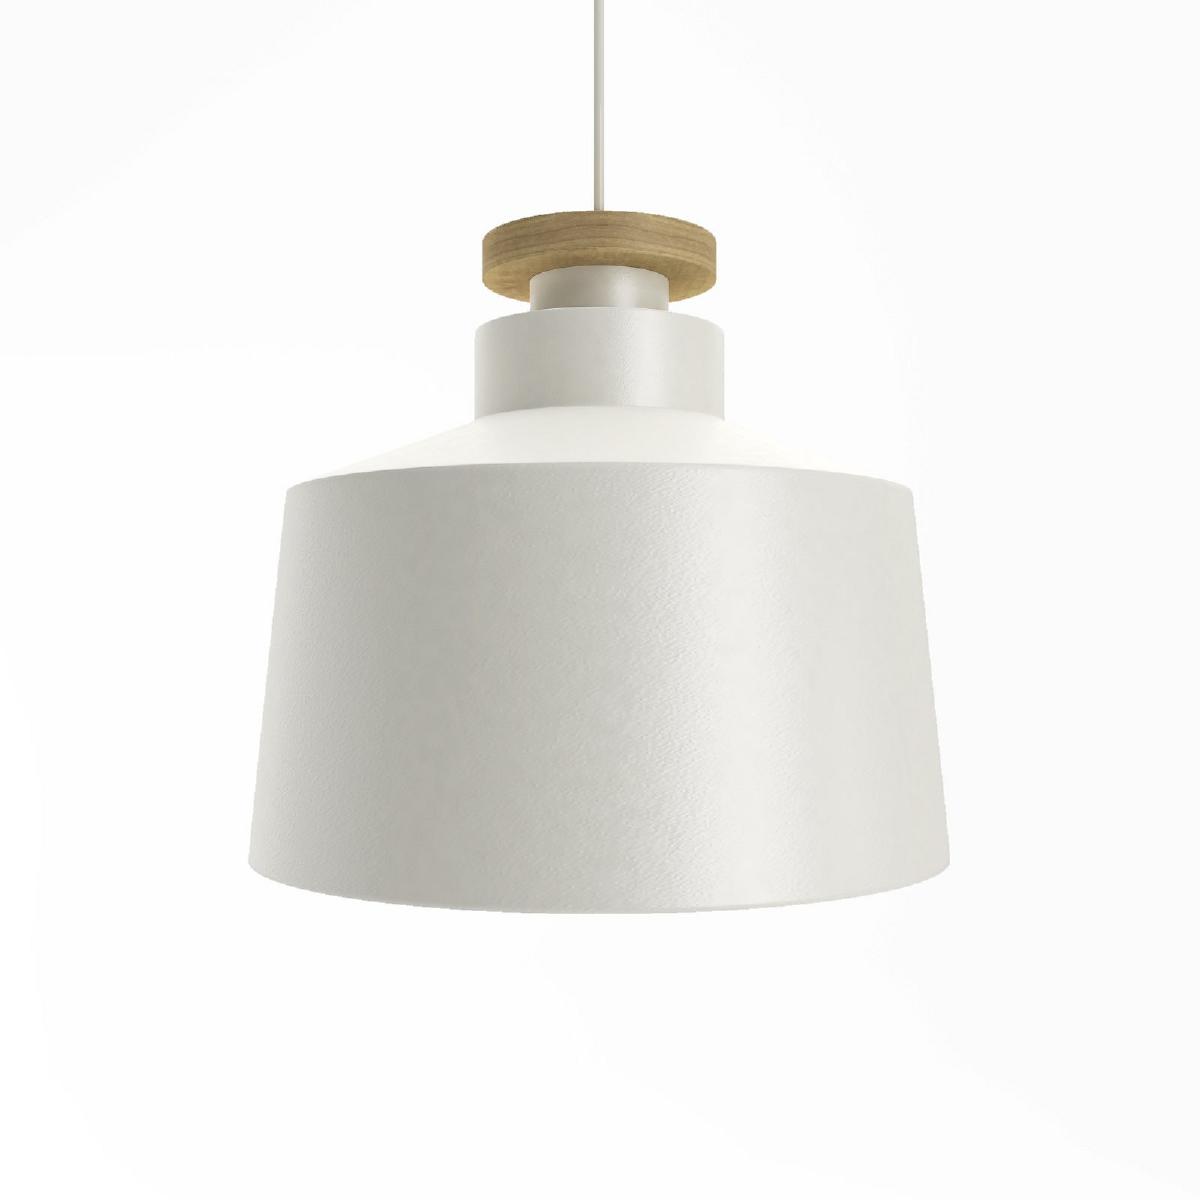 Buy Percole Pendant Lights for Dining Table Online at Best